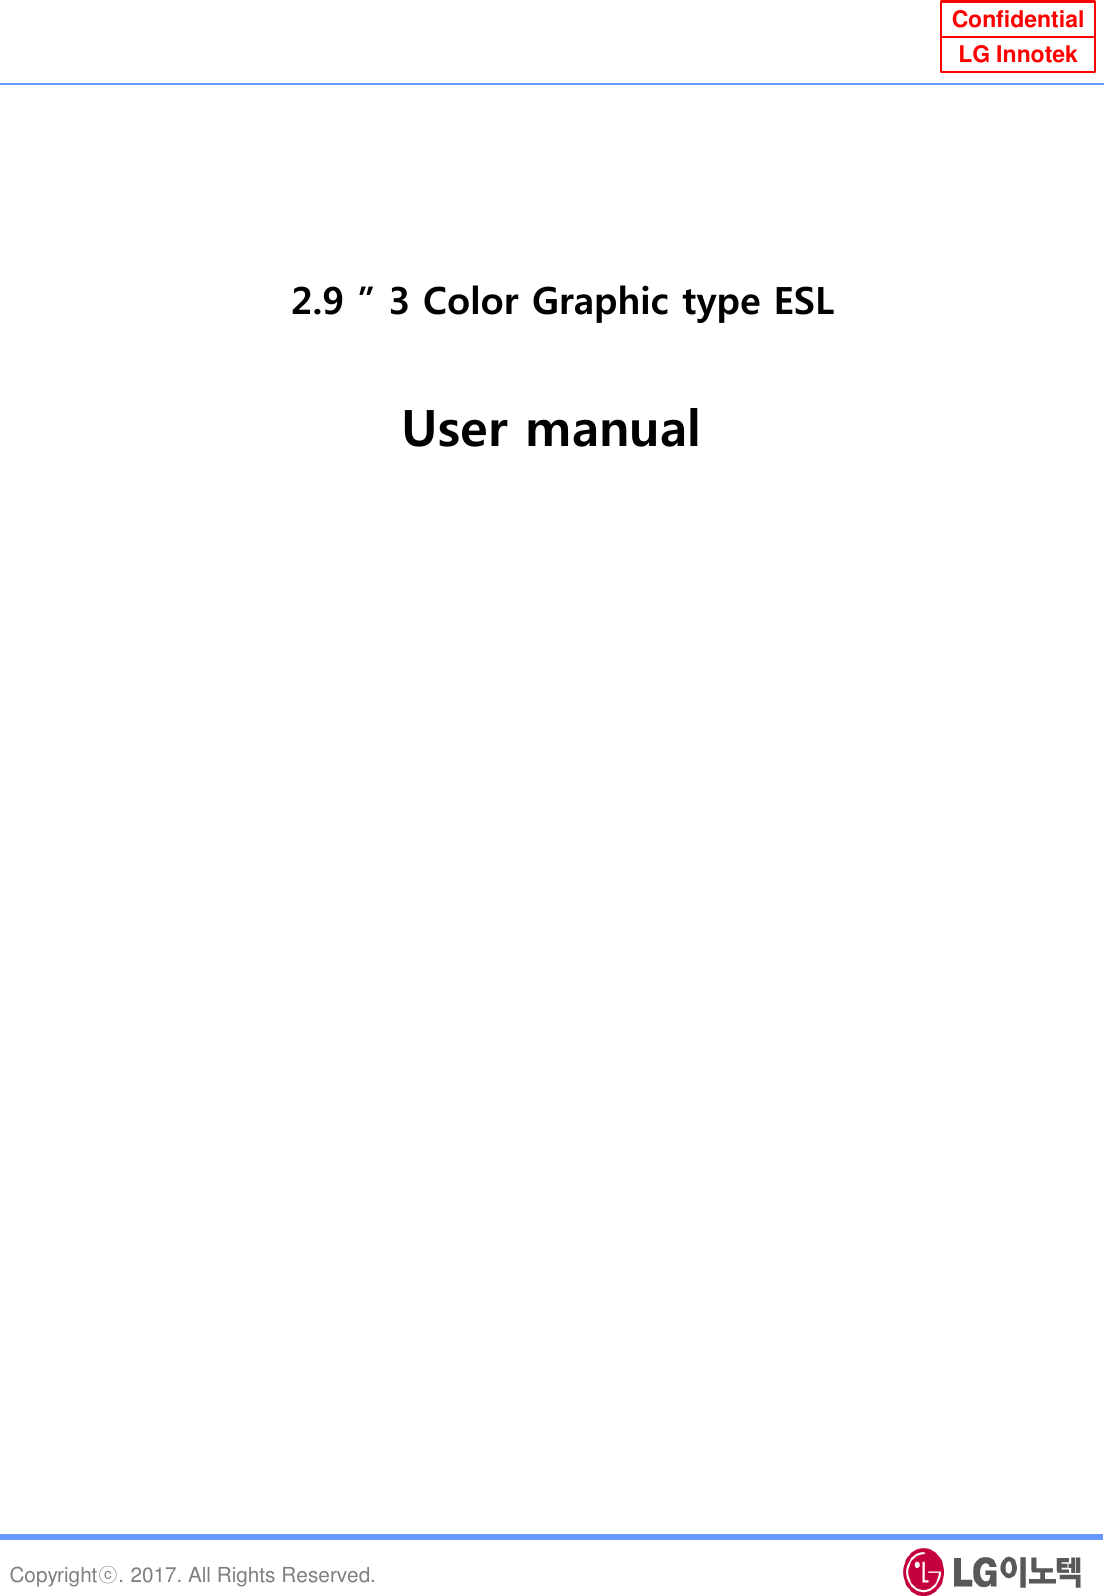 Copyrightⓒ. 2017. All Rights Reserved. Confidential LG Innotek 2.9 ” 3 Color Graphic type ESL User manual 